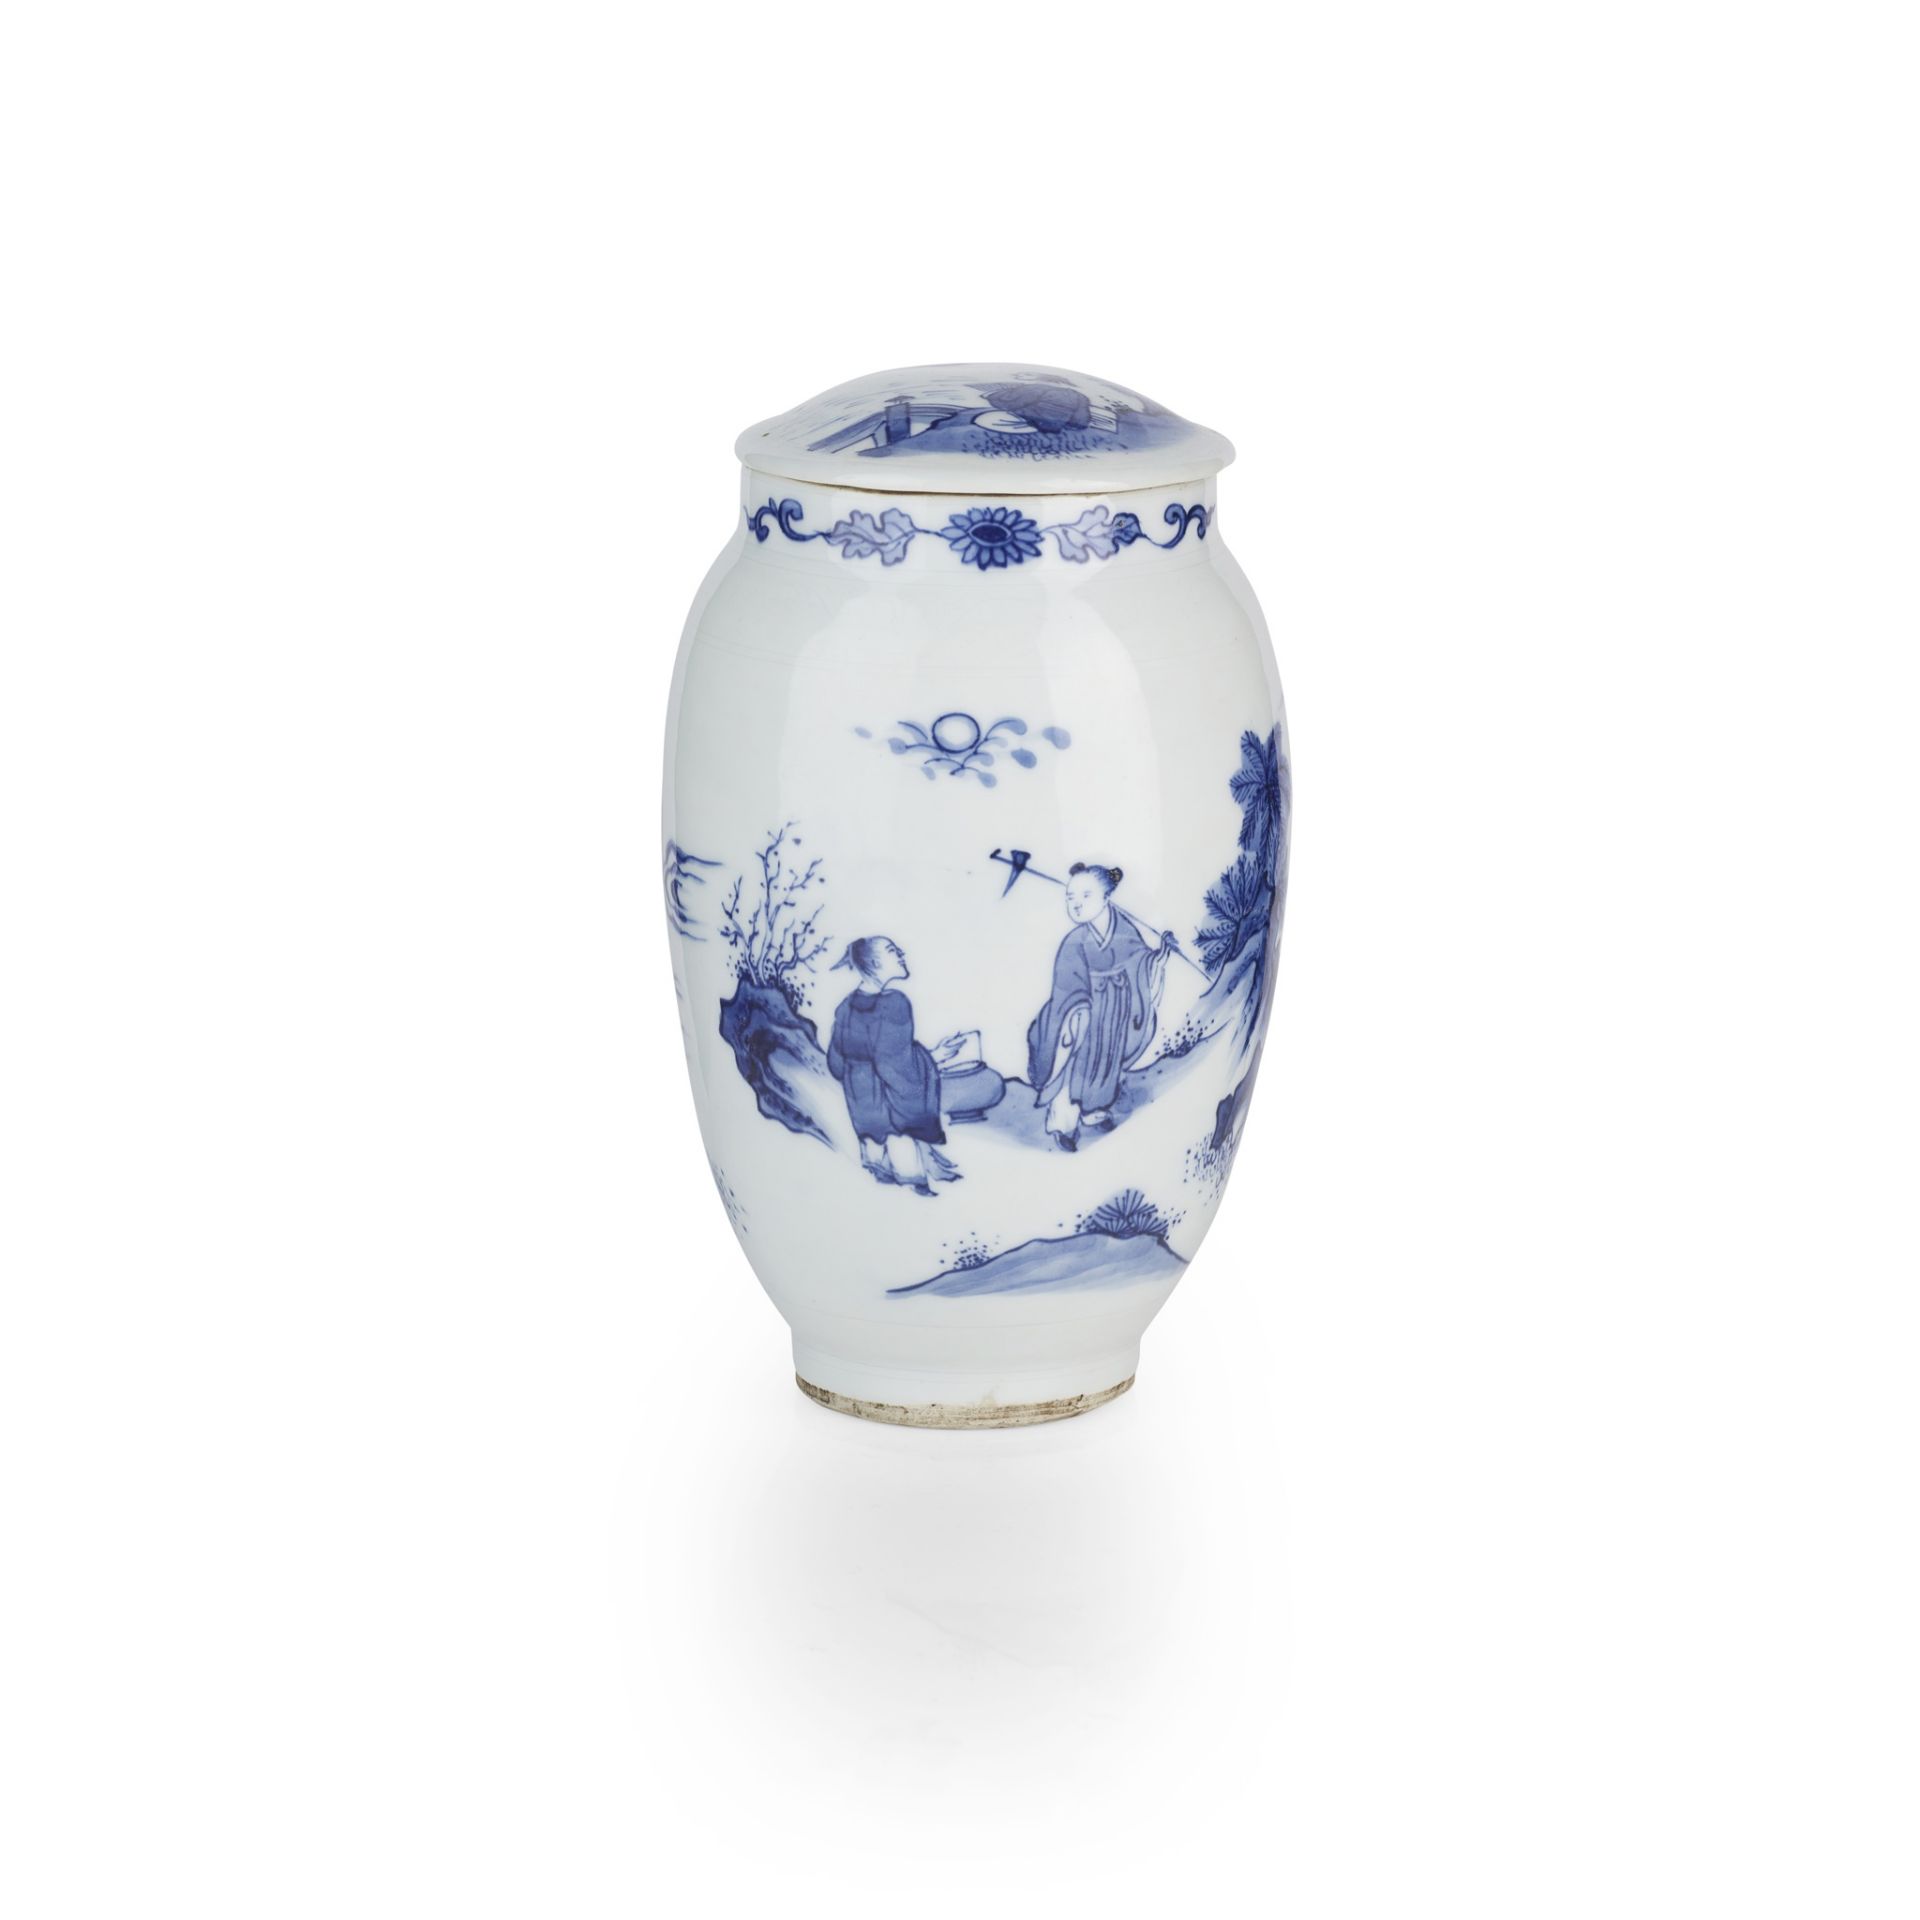 BLUE AND WHITE LIDDED JAR 19TH-20TH CENTURY